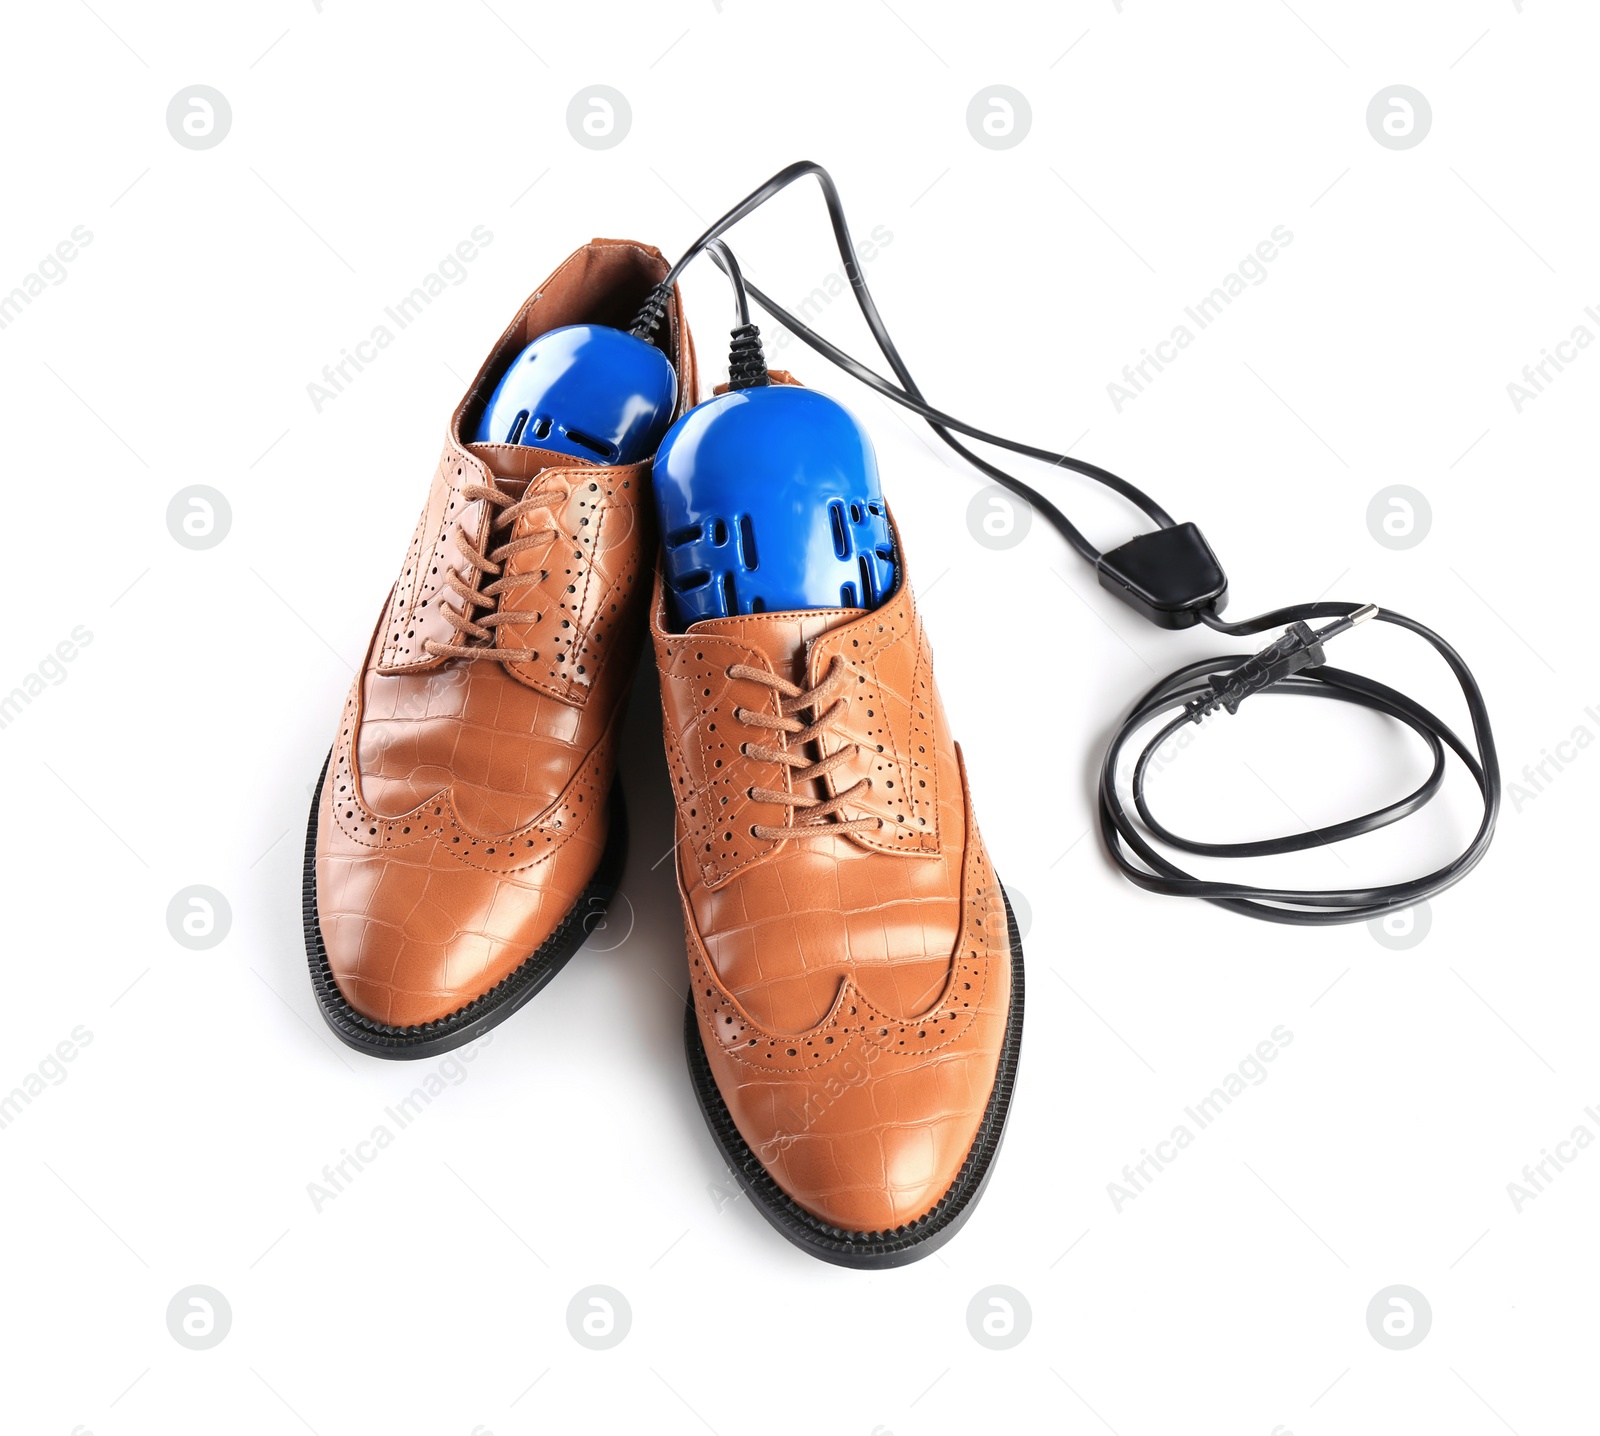 Photo of Pair of stylish shoes with modern electric footwear dryer on white background